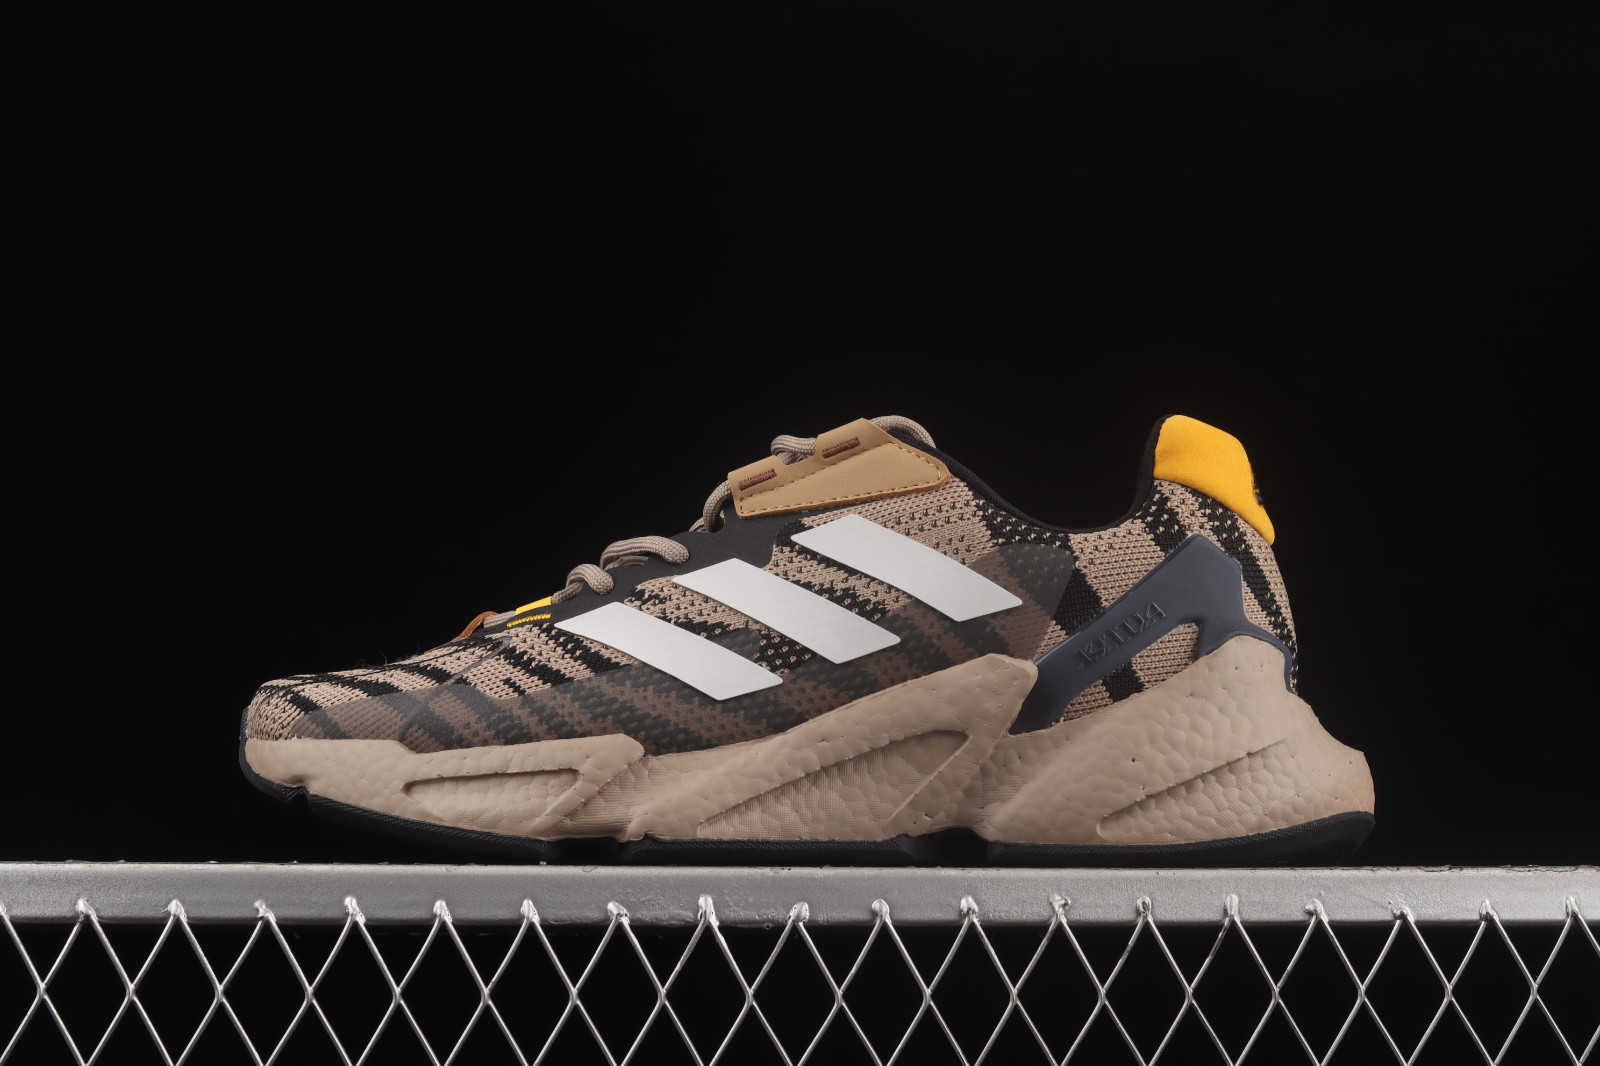 kritiker Modstand rille Adidas Ultraboost All Terrain Olive Green Core Black Yellow S23682 - adidas  outlet phnom penh airport hotel new york - Sepsale